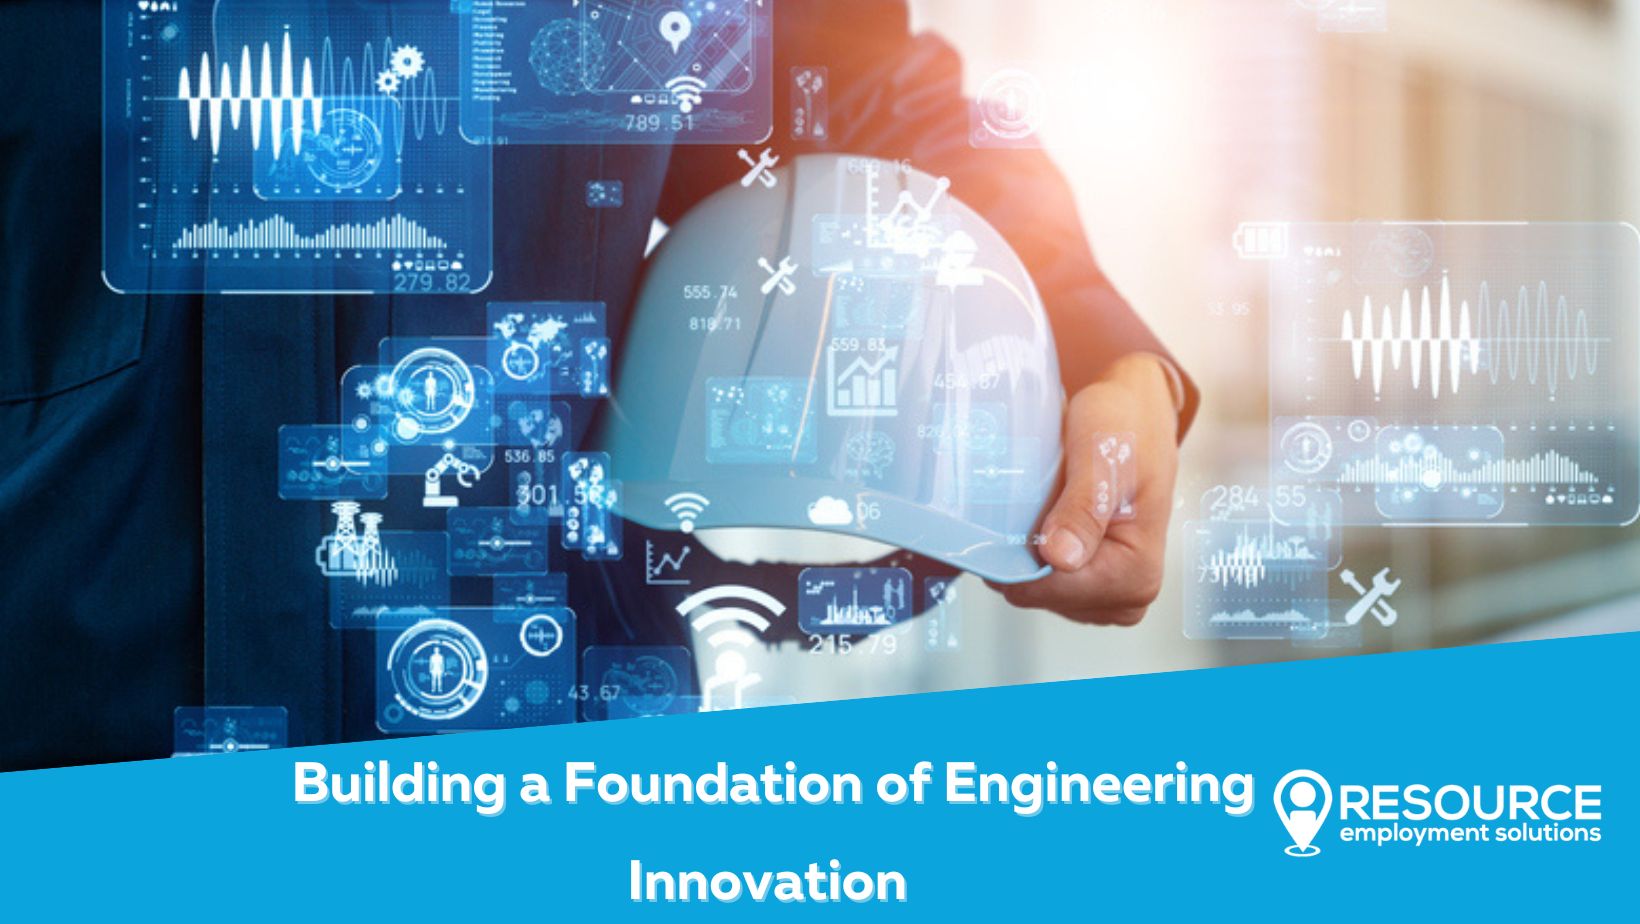 Building a Foundation of Engineering Innovation with Resource Employment Solutions